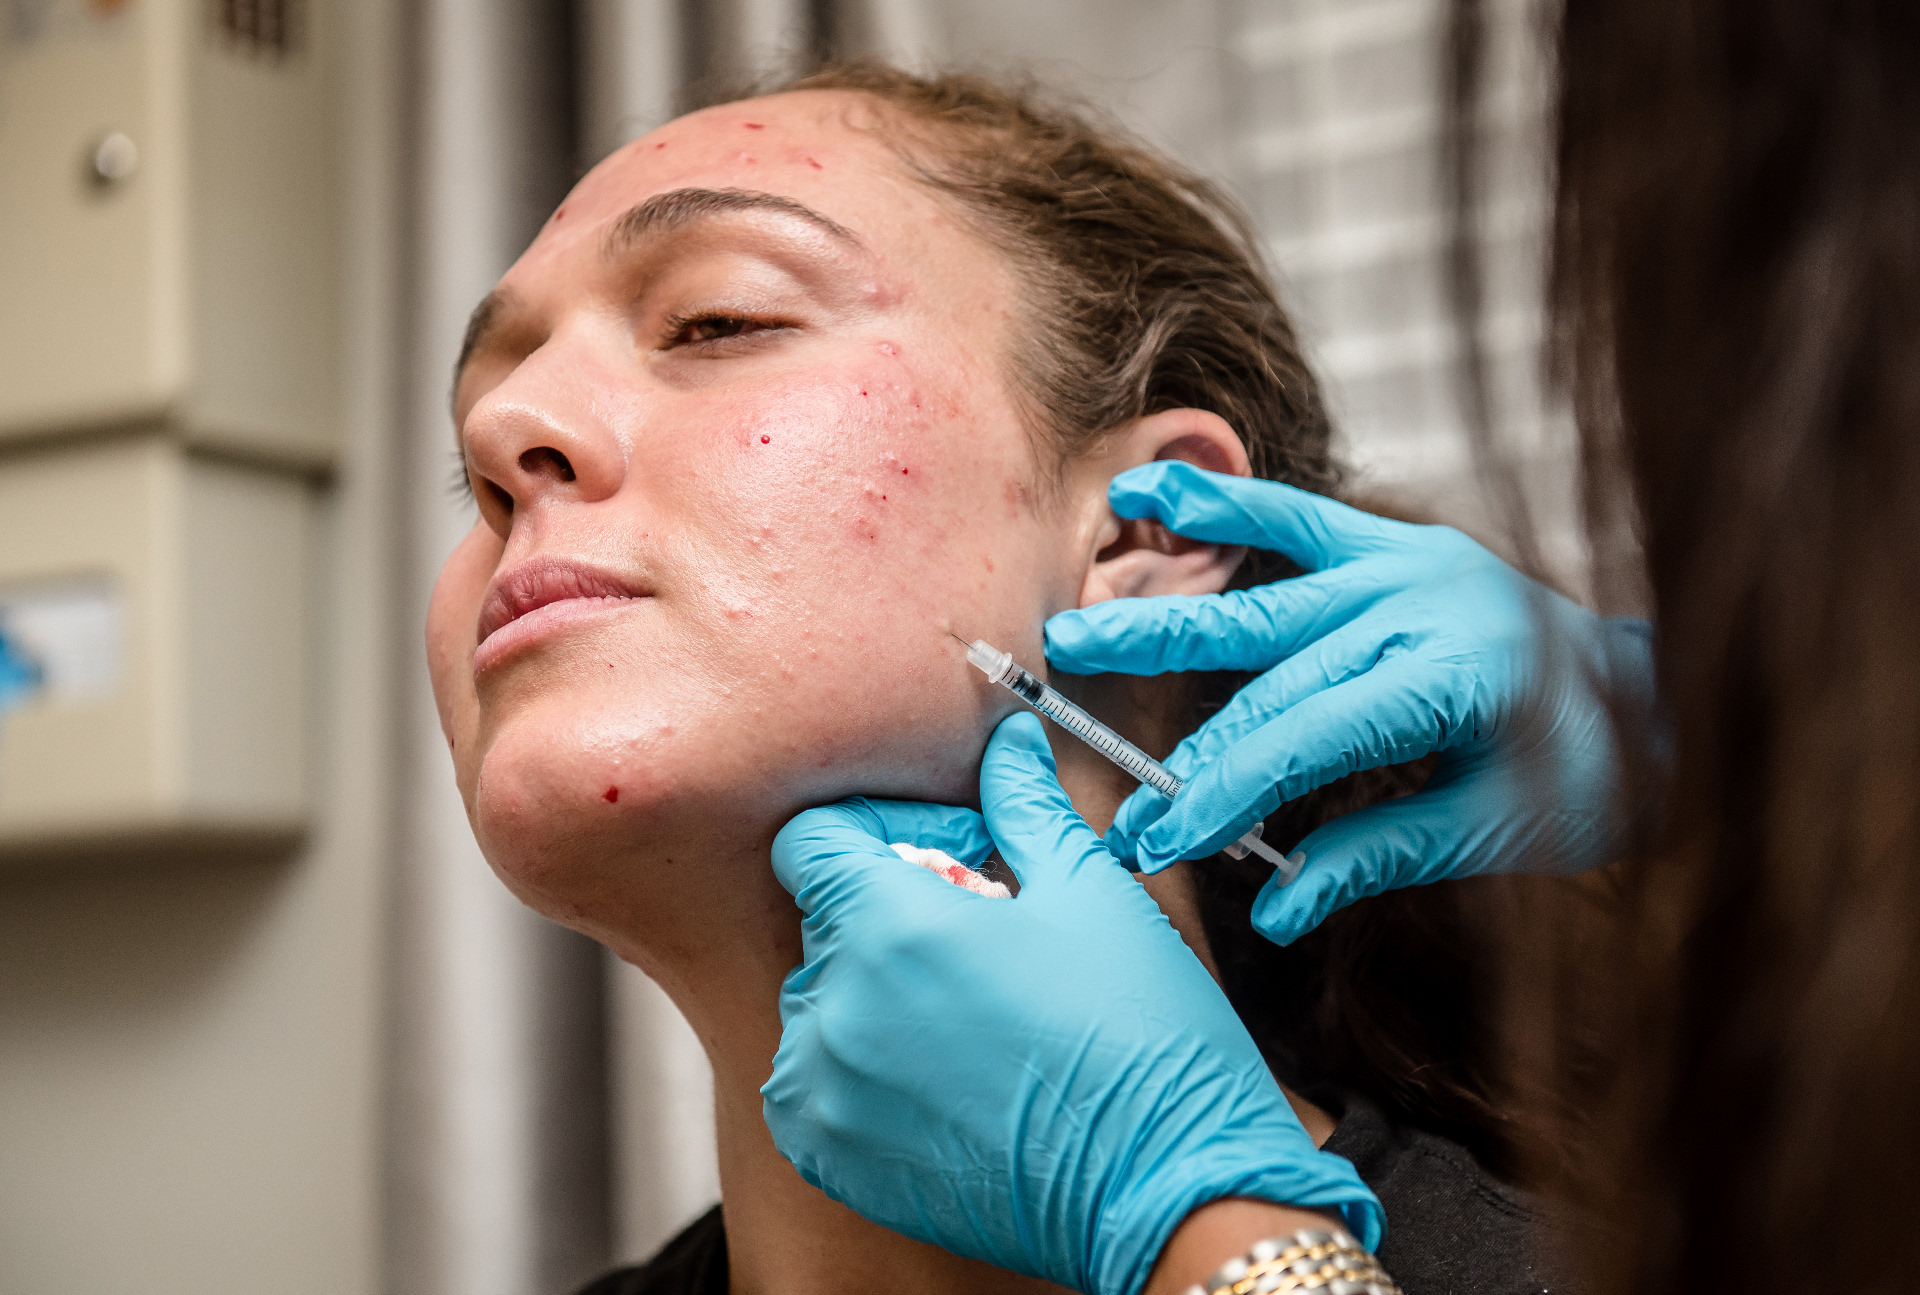 acne and acne scarring treatment in greensboro nc